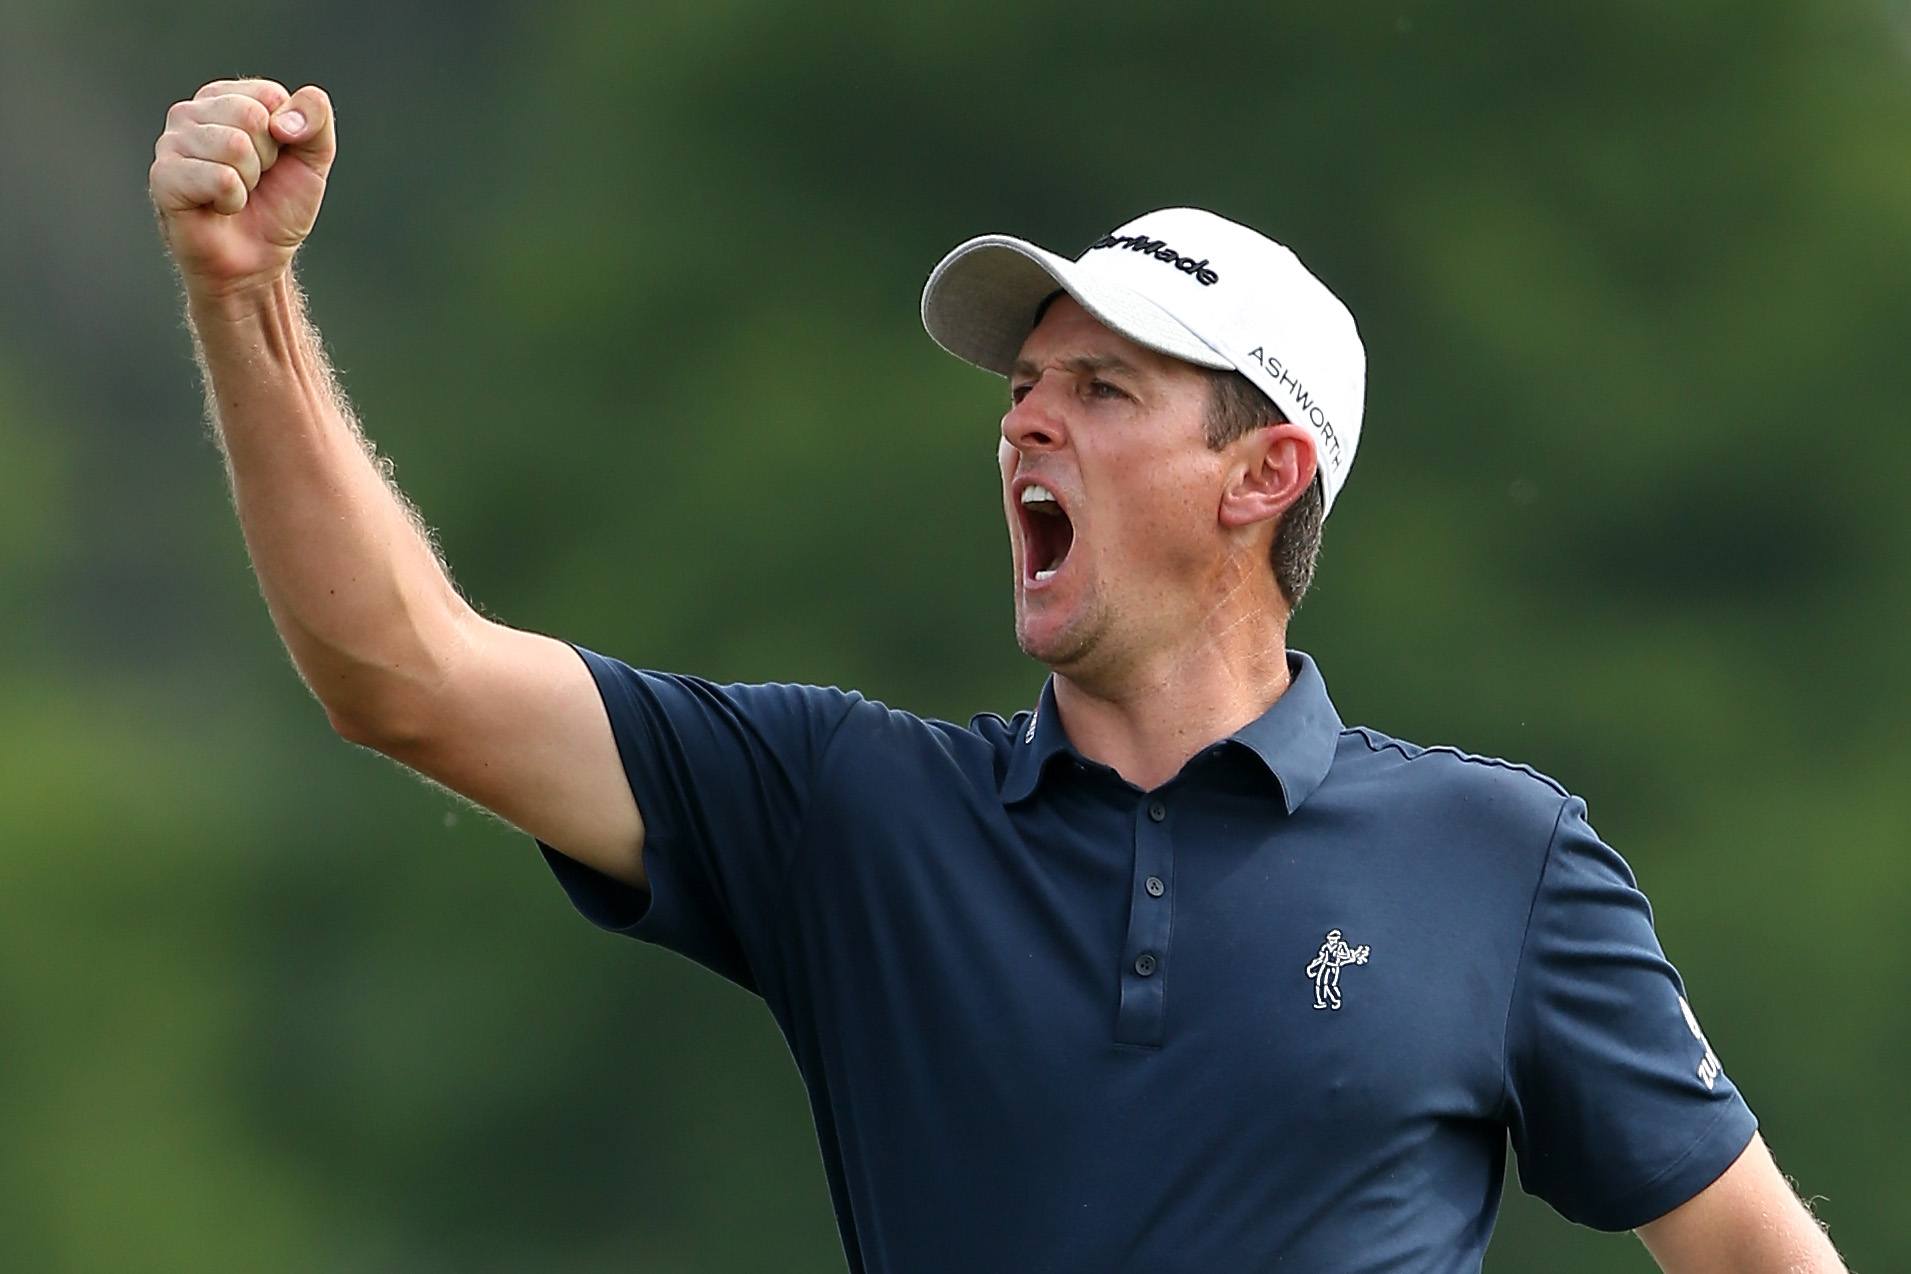 Justin Rose pumps his fist after getting a hole in one.